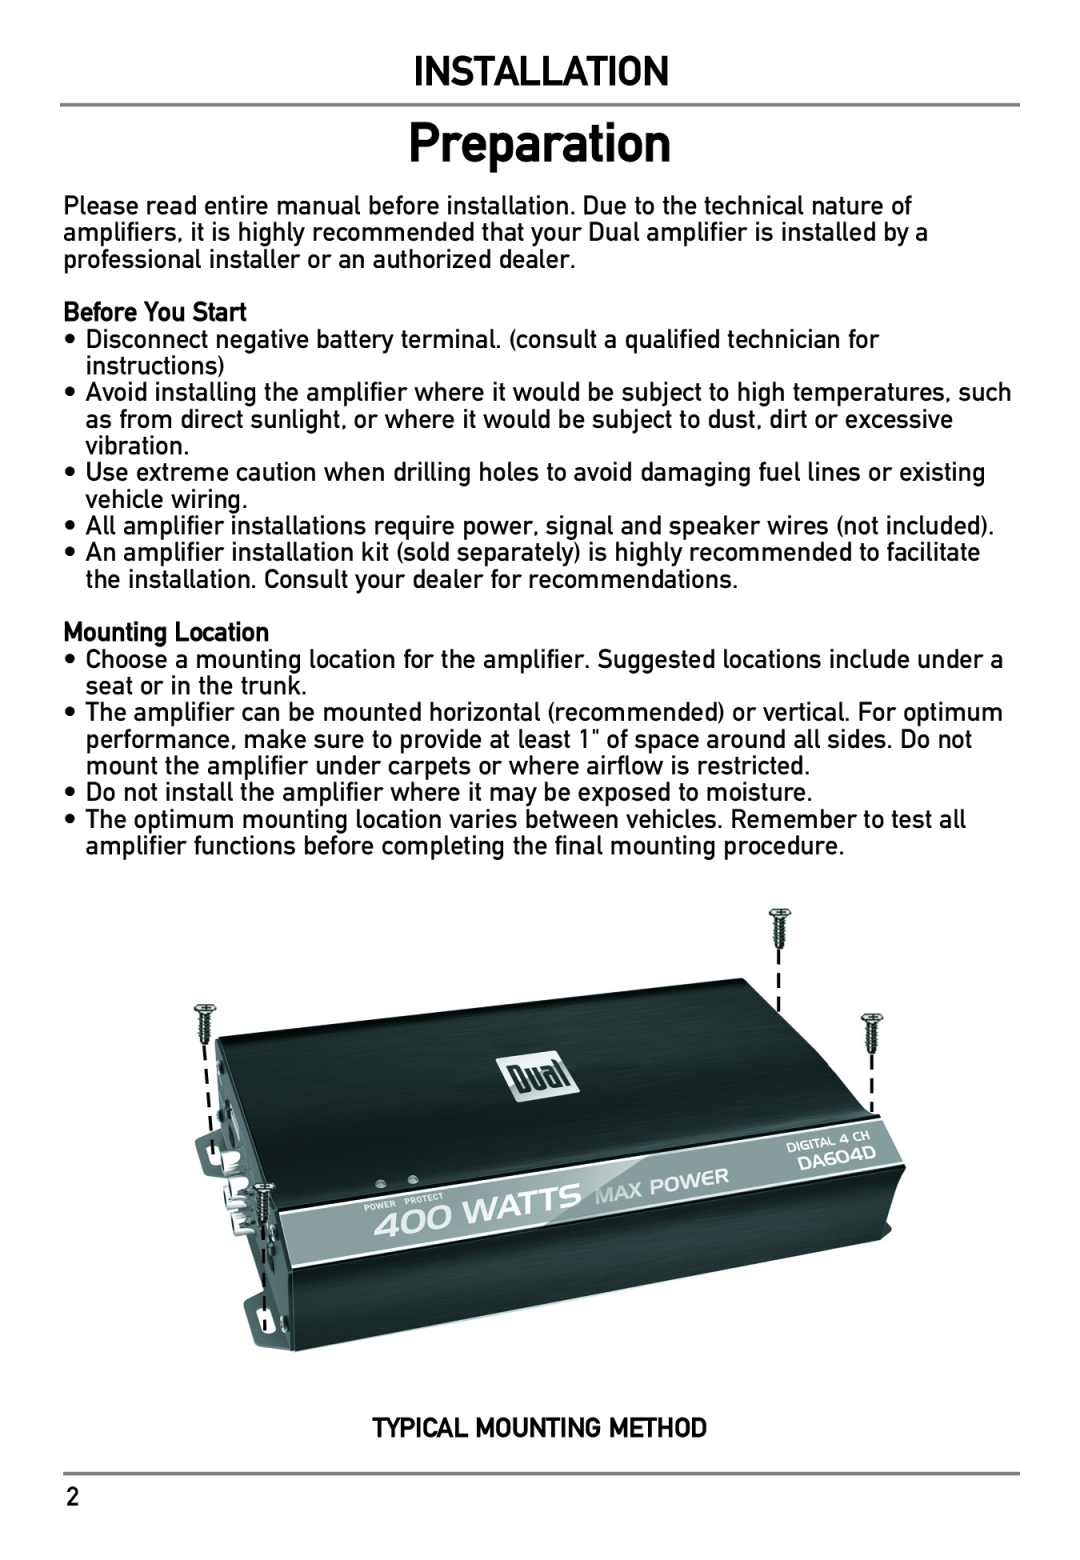 Dual DA604D owner manual Preparation, Installation, Before You Start, Mounting Location, Typical Mounting Method 